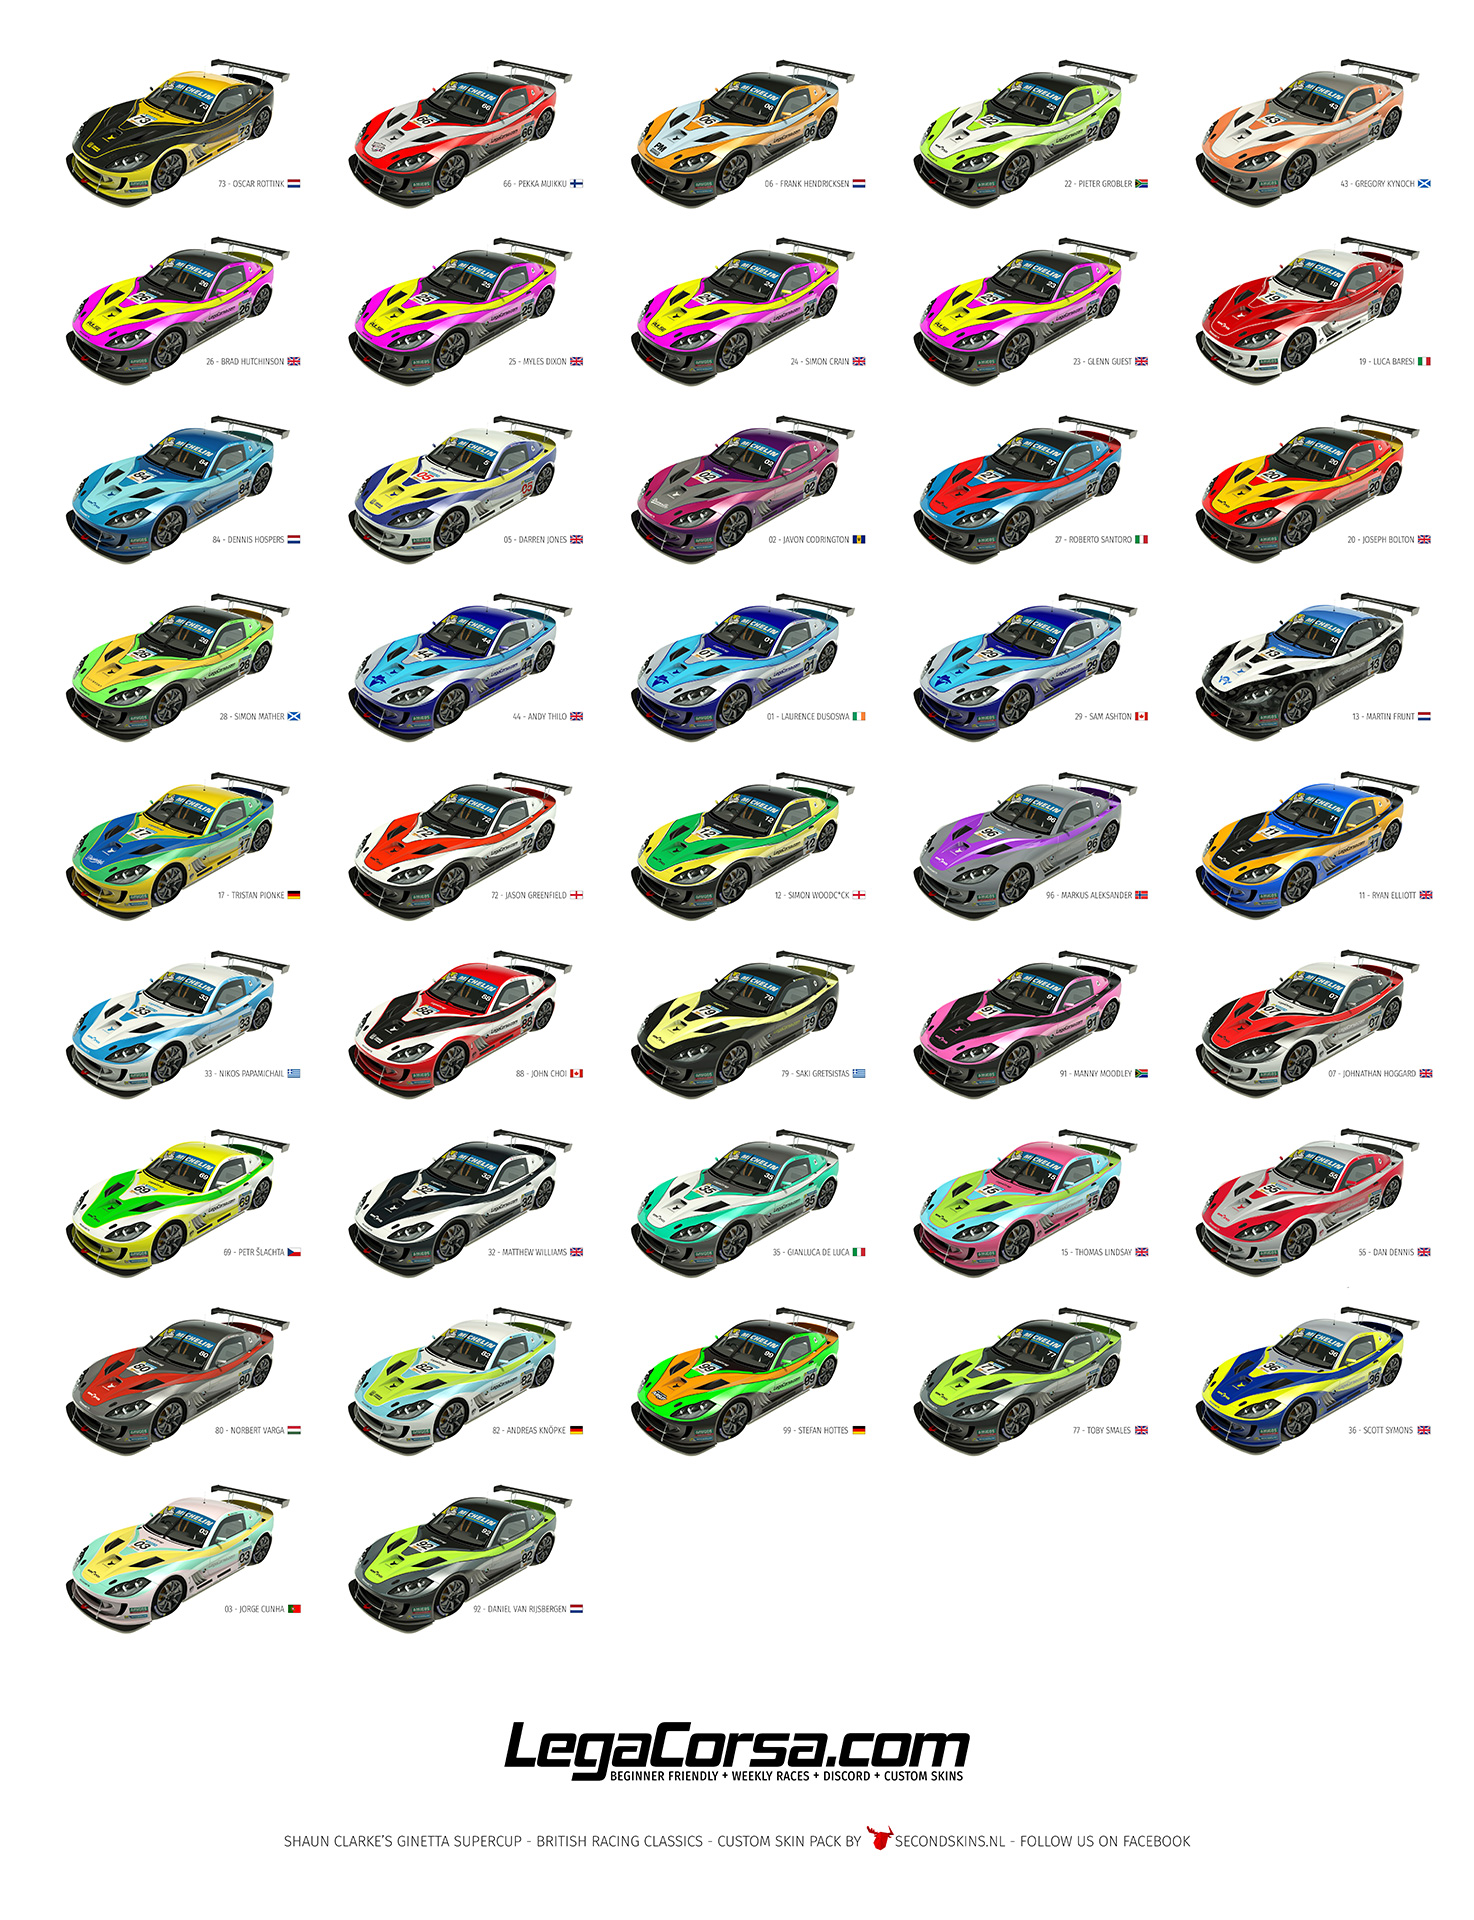 ginetta_supercup_know_your_enemy_thumb.jpg